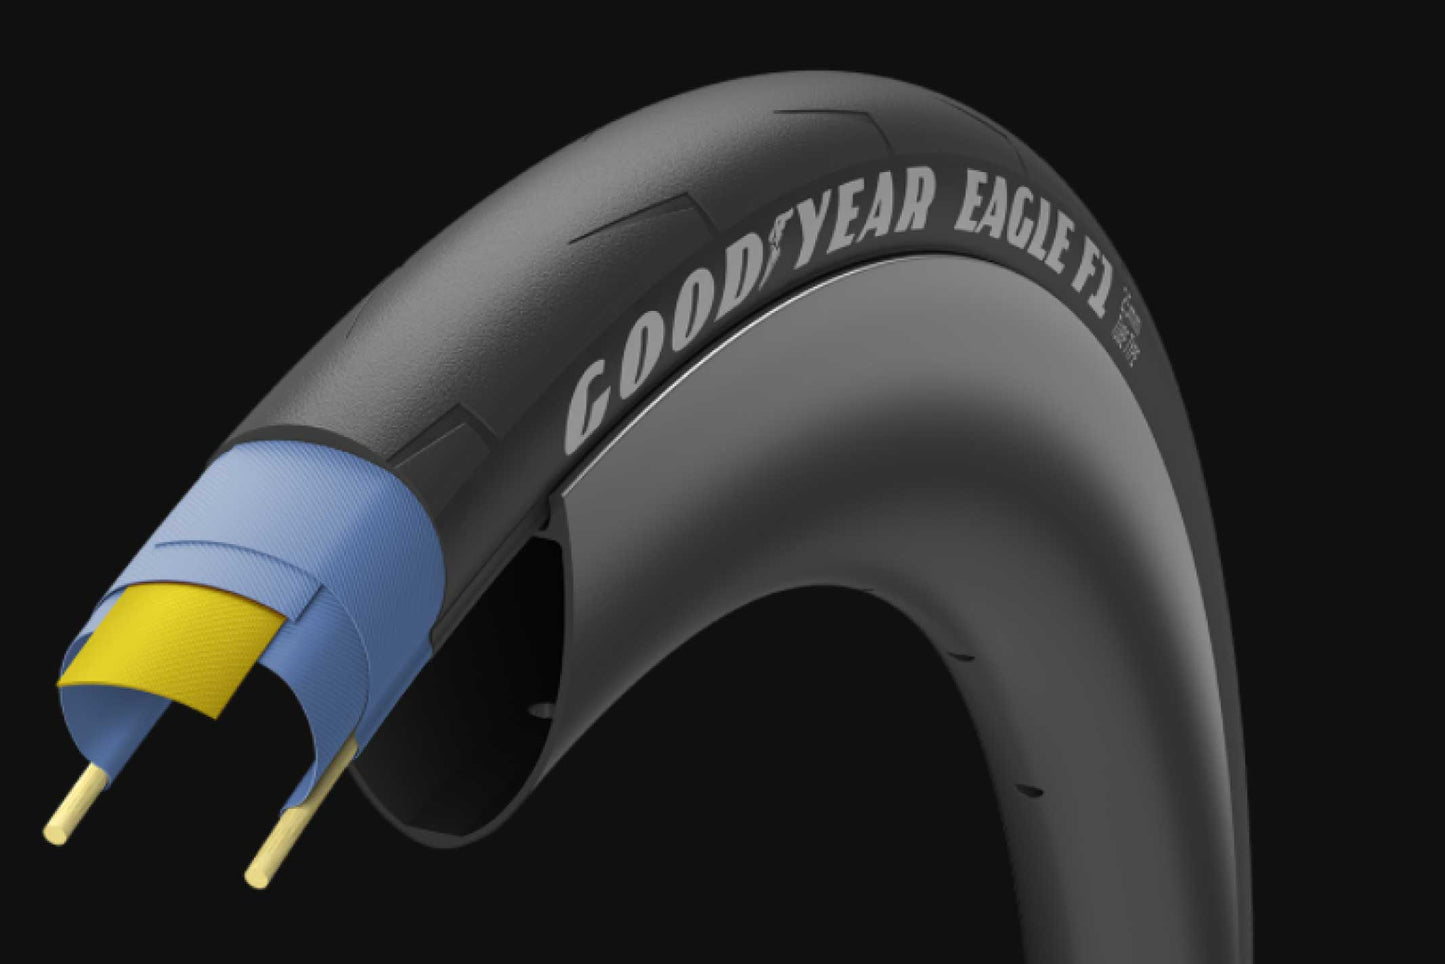 GOODYEAR Eagle F1 Road Tyre